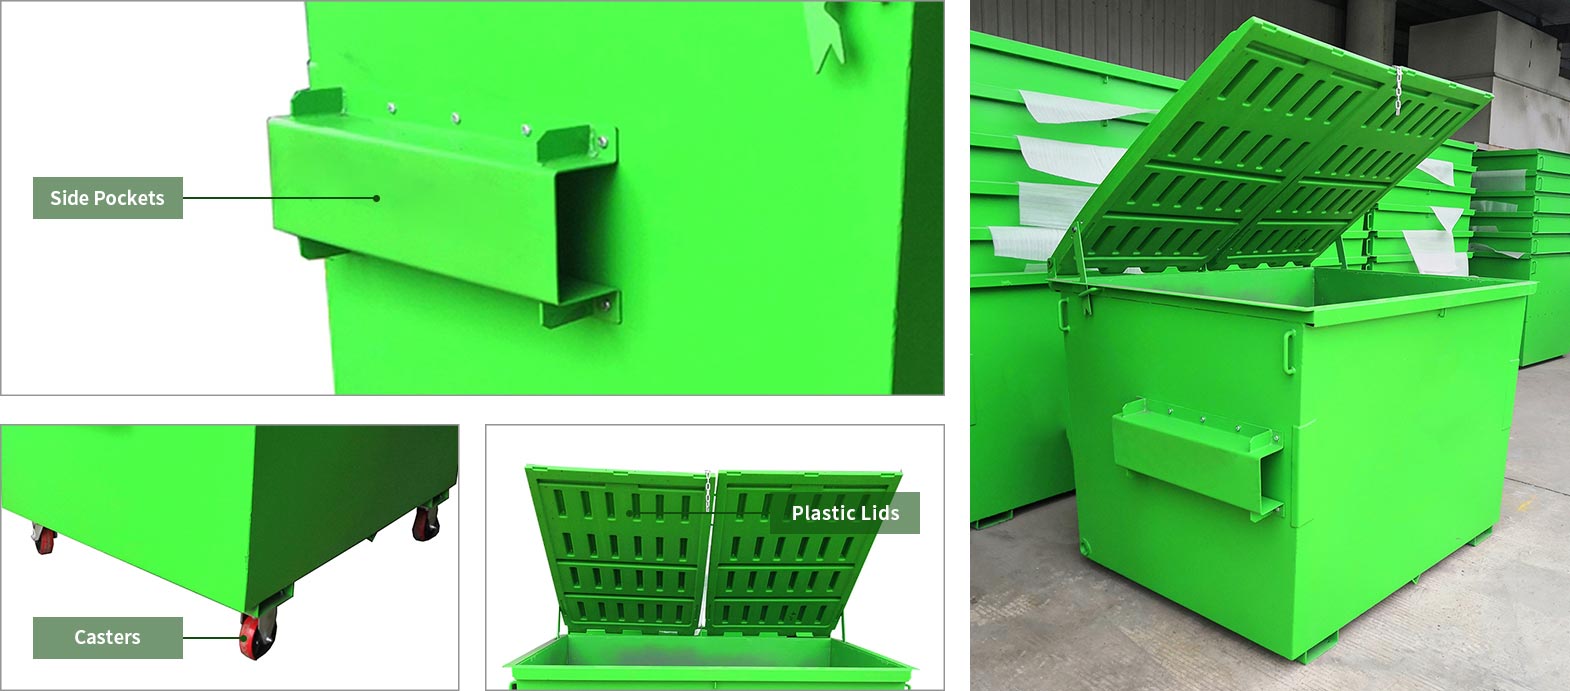 Dumpster Container